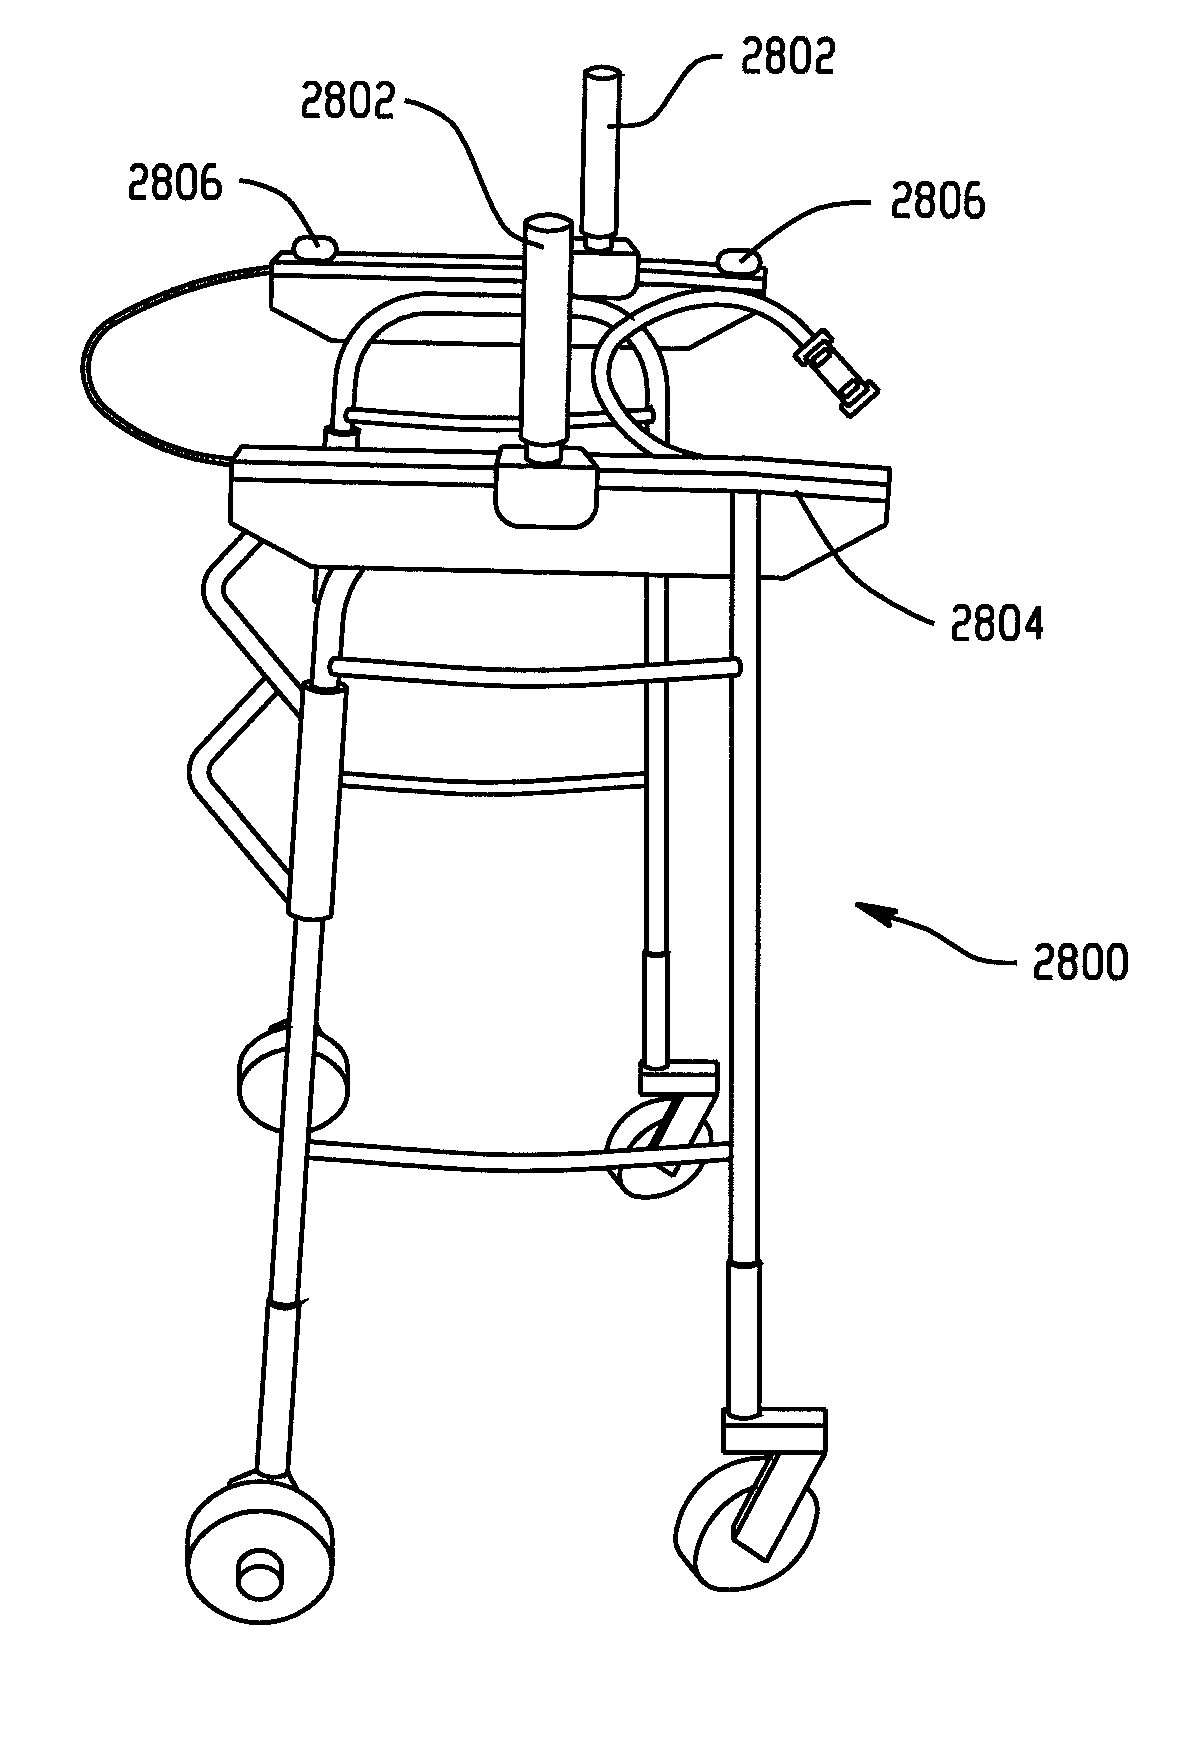 Patient aid devices, particularly for mobile upper extremity support in railed devices such as parallel bars and treadmills